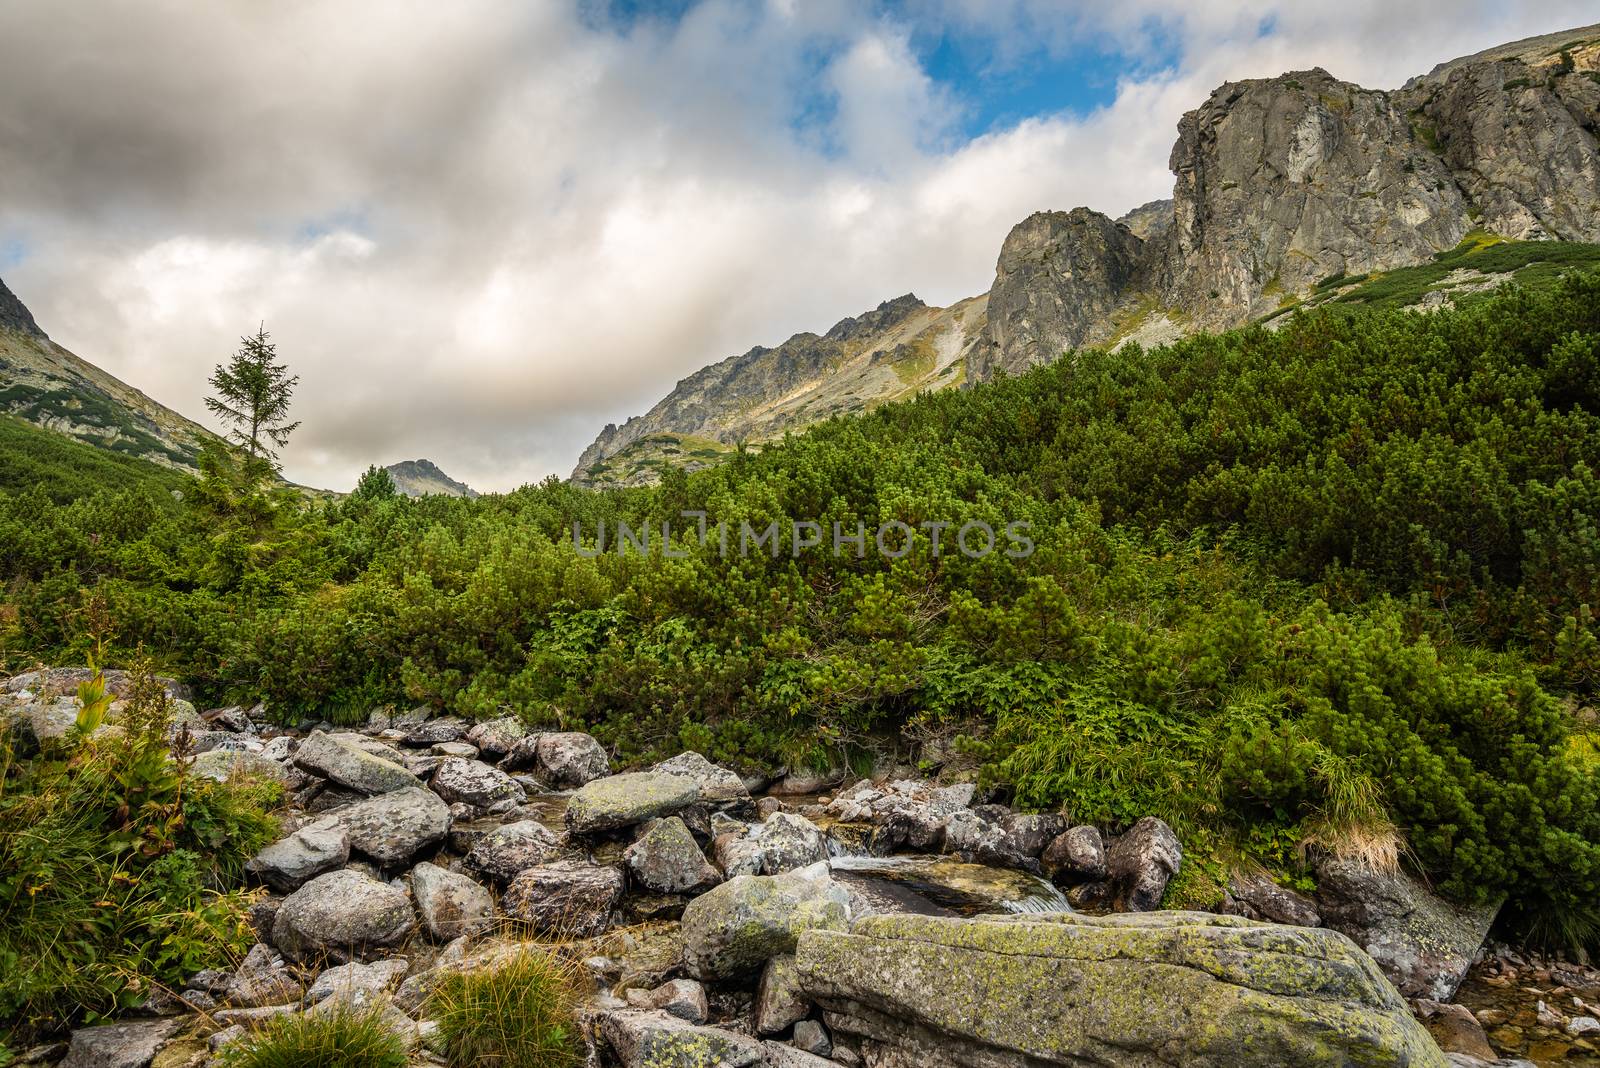 Mountain Landscape on Cloudy Day by Kayco